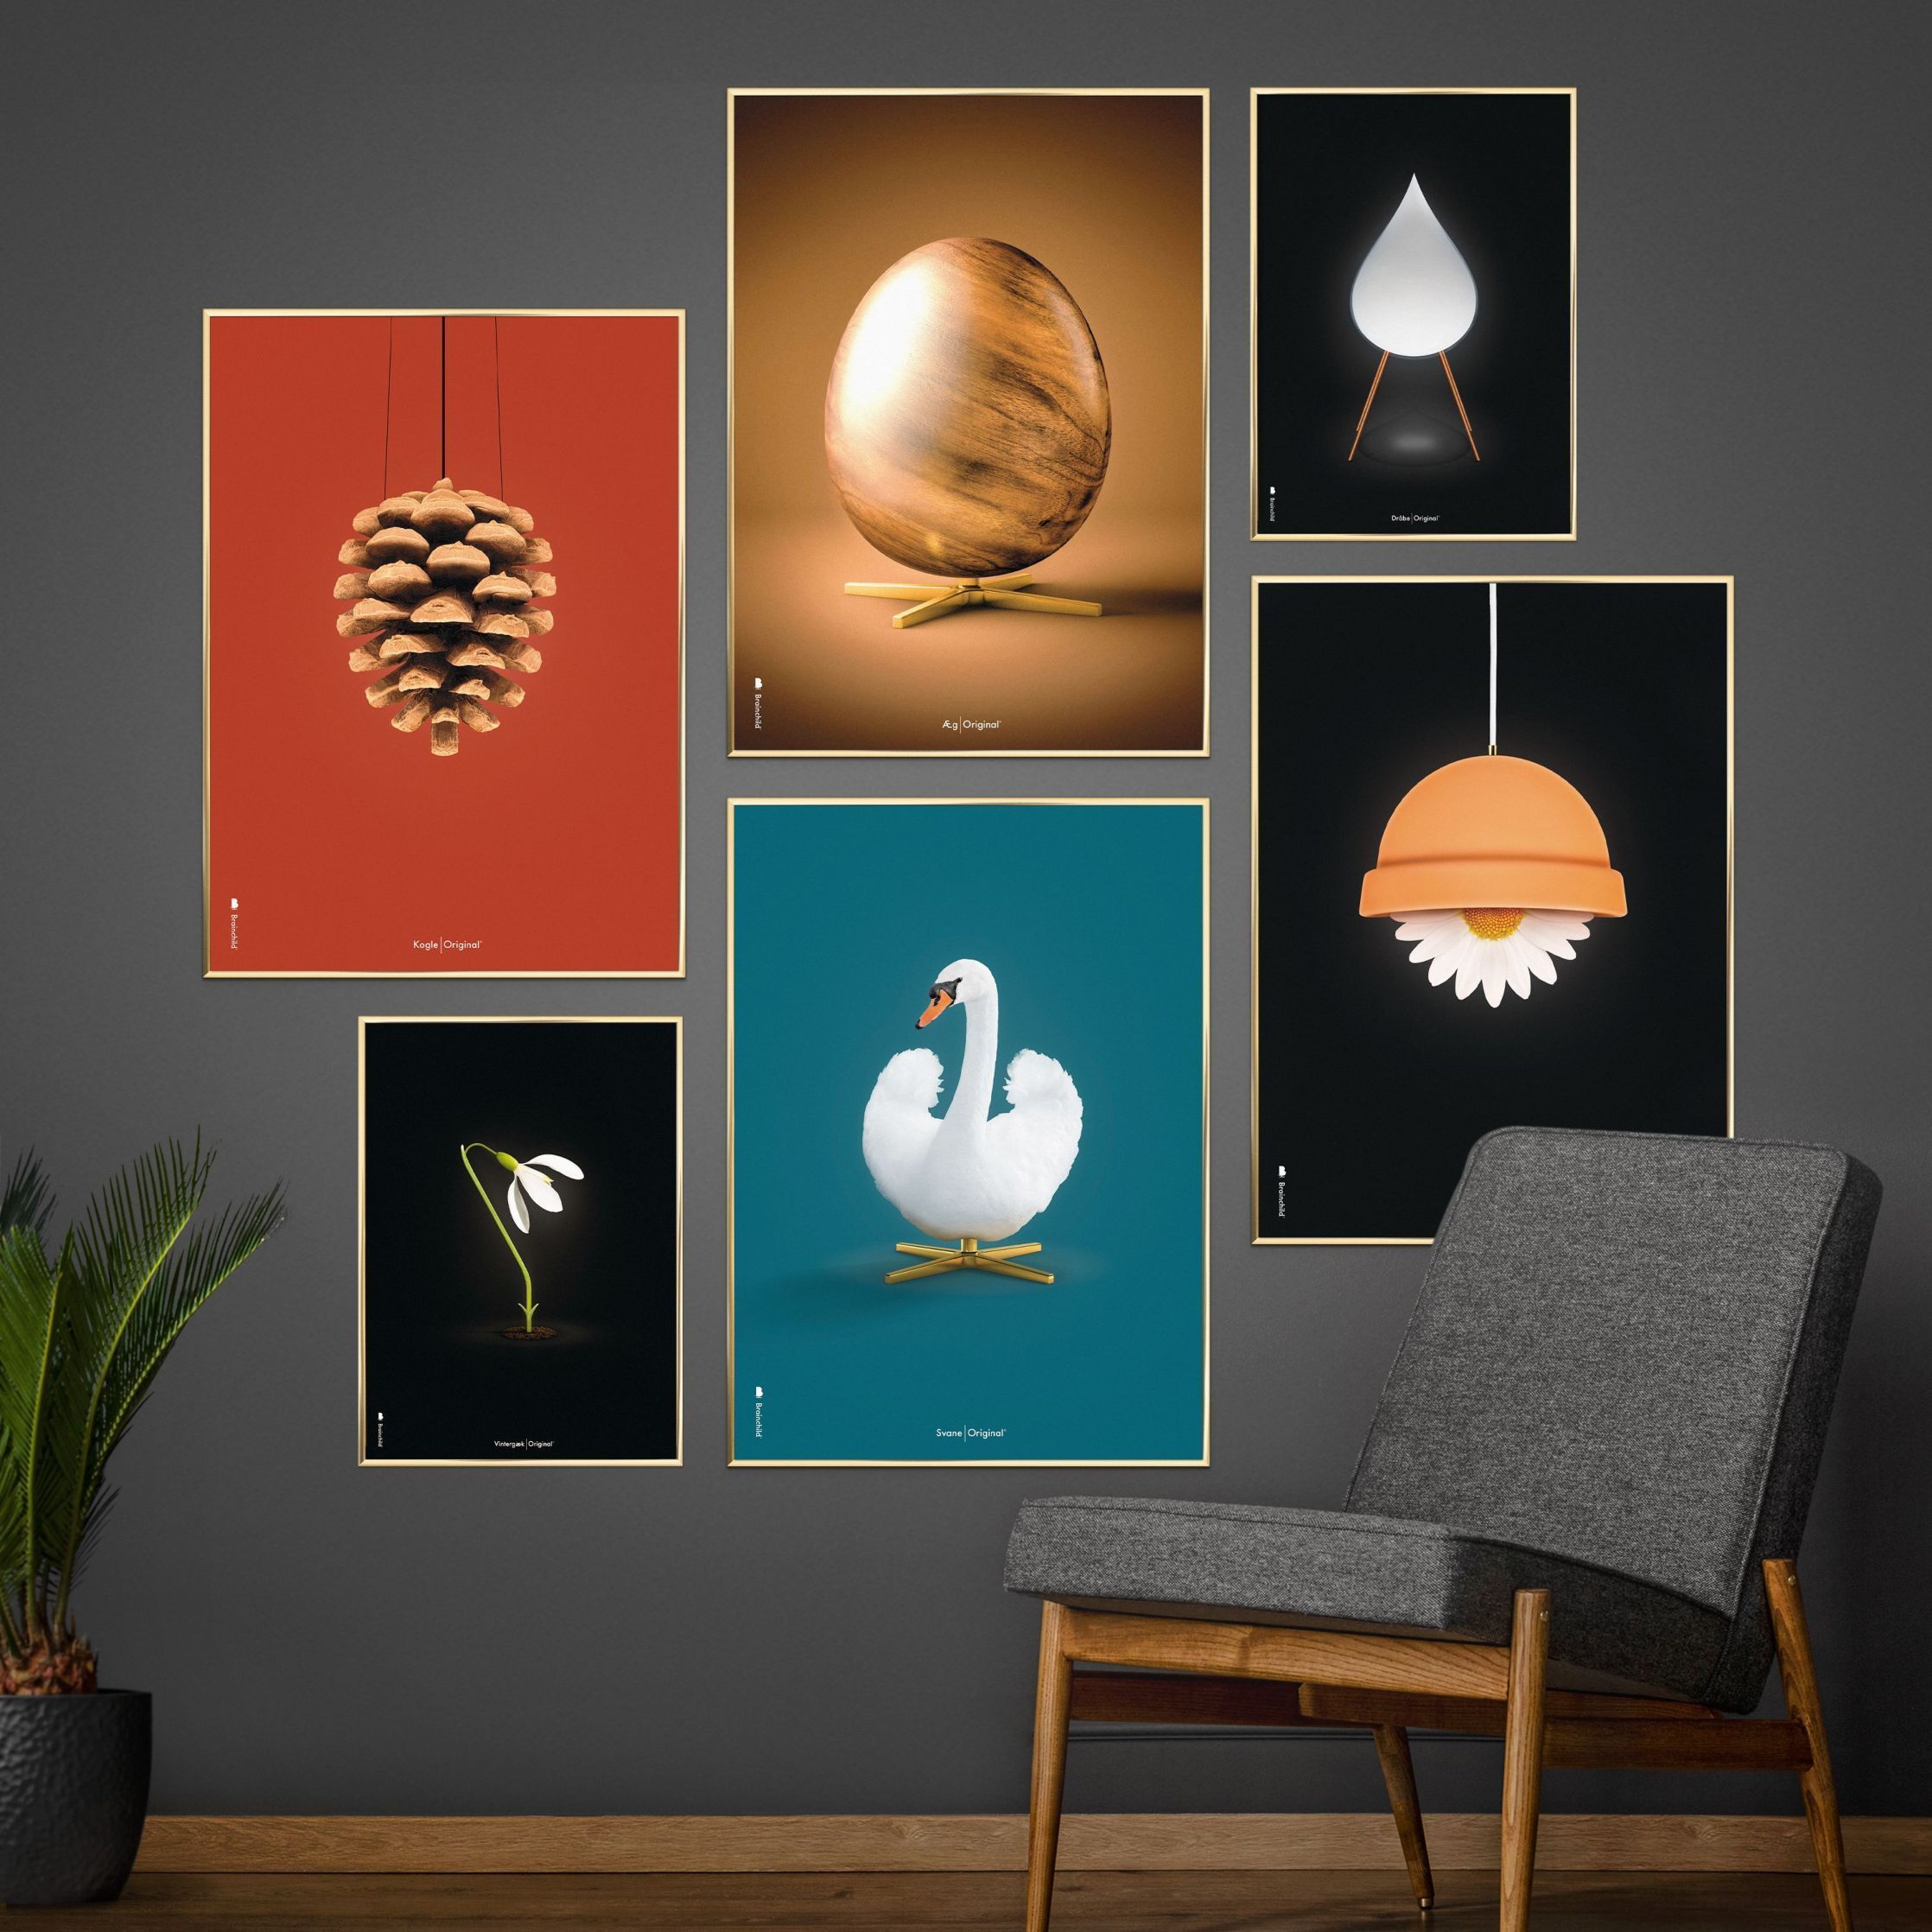 brainchild Swan Classic Poster, donker hout frame 70x100 cm, petroleumblauwe achtergrond